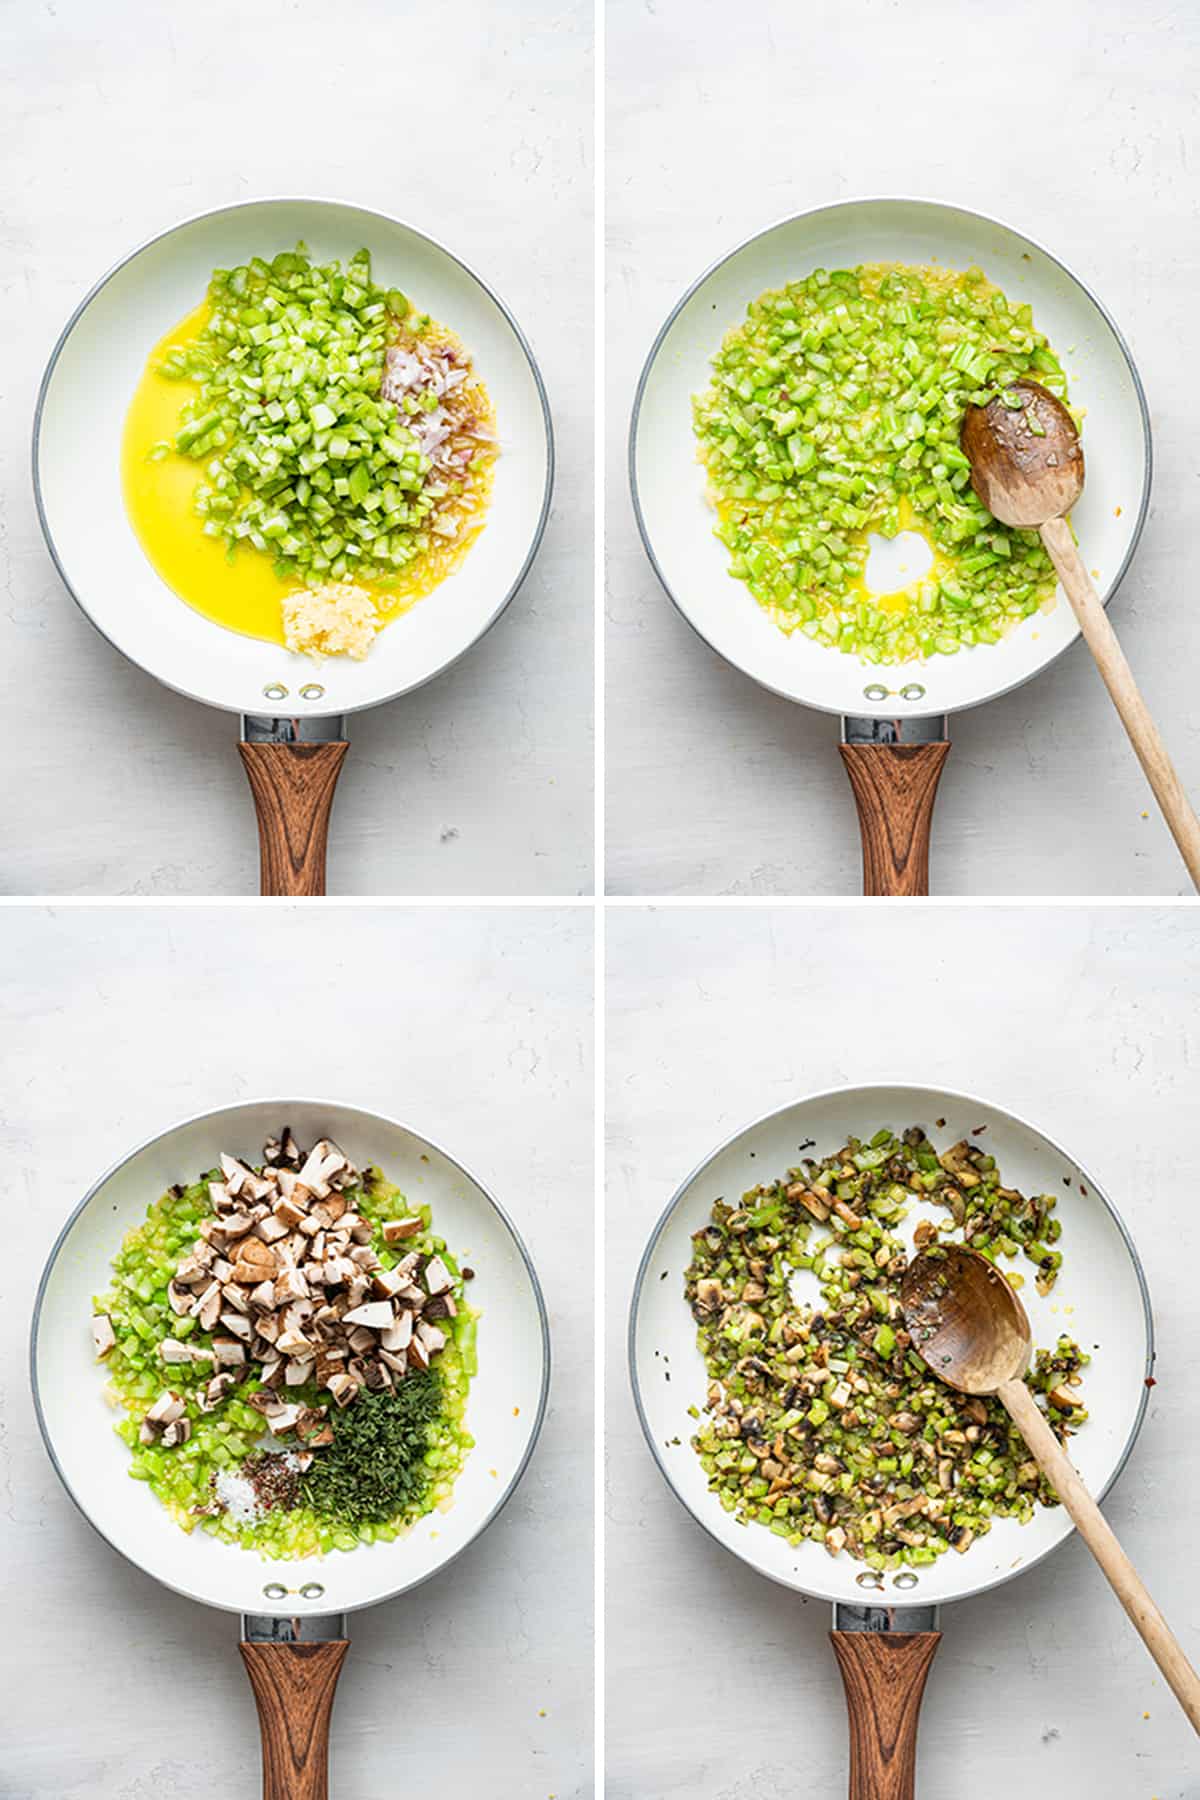 Four images. First, a skillet with olive oil, celery, shallots, and garlic, raw; second, a skillet with cooked celery, garlic, and shallots, and a wooden spoon in it; third, a skillet with cooked celery, garlic, and shallots, with uncooked mushrooms and herbs; fourth, a skillet with cooked celery, shallots, garlic, mushrooms, and herbs, with a wooden spoon